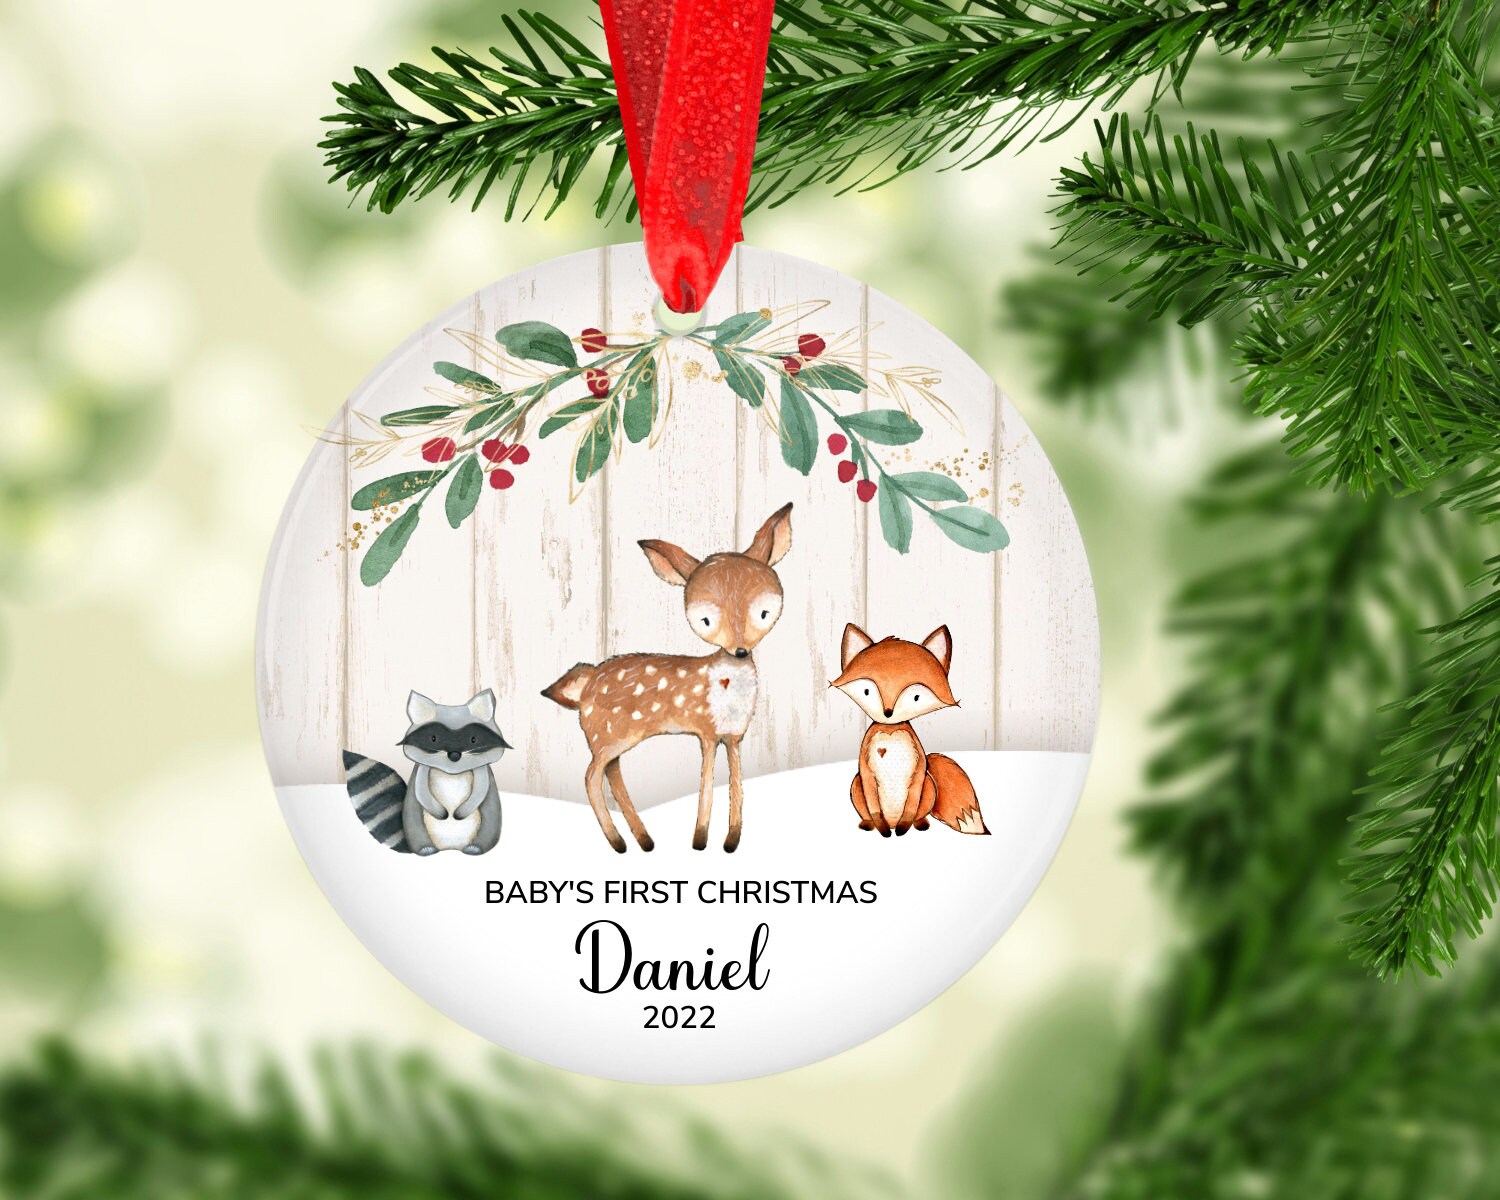 Personalized Woodland 2022 Baby Ornament - Baby's First Christmas Ornament